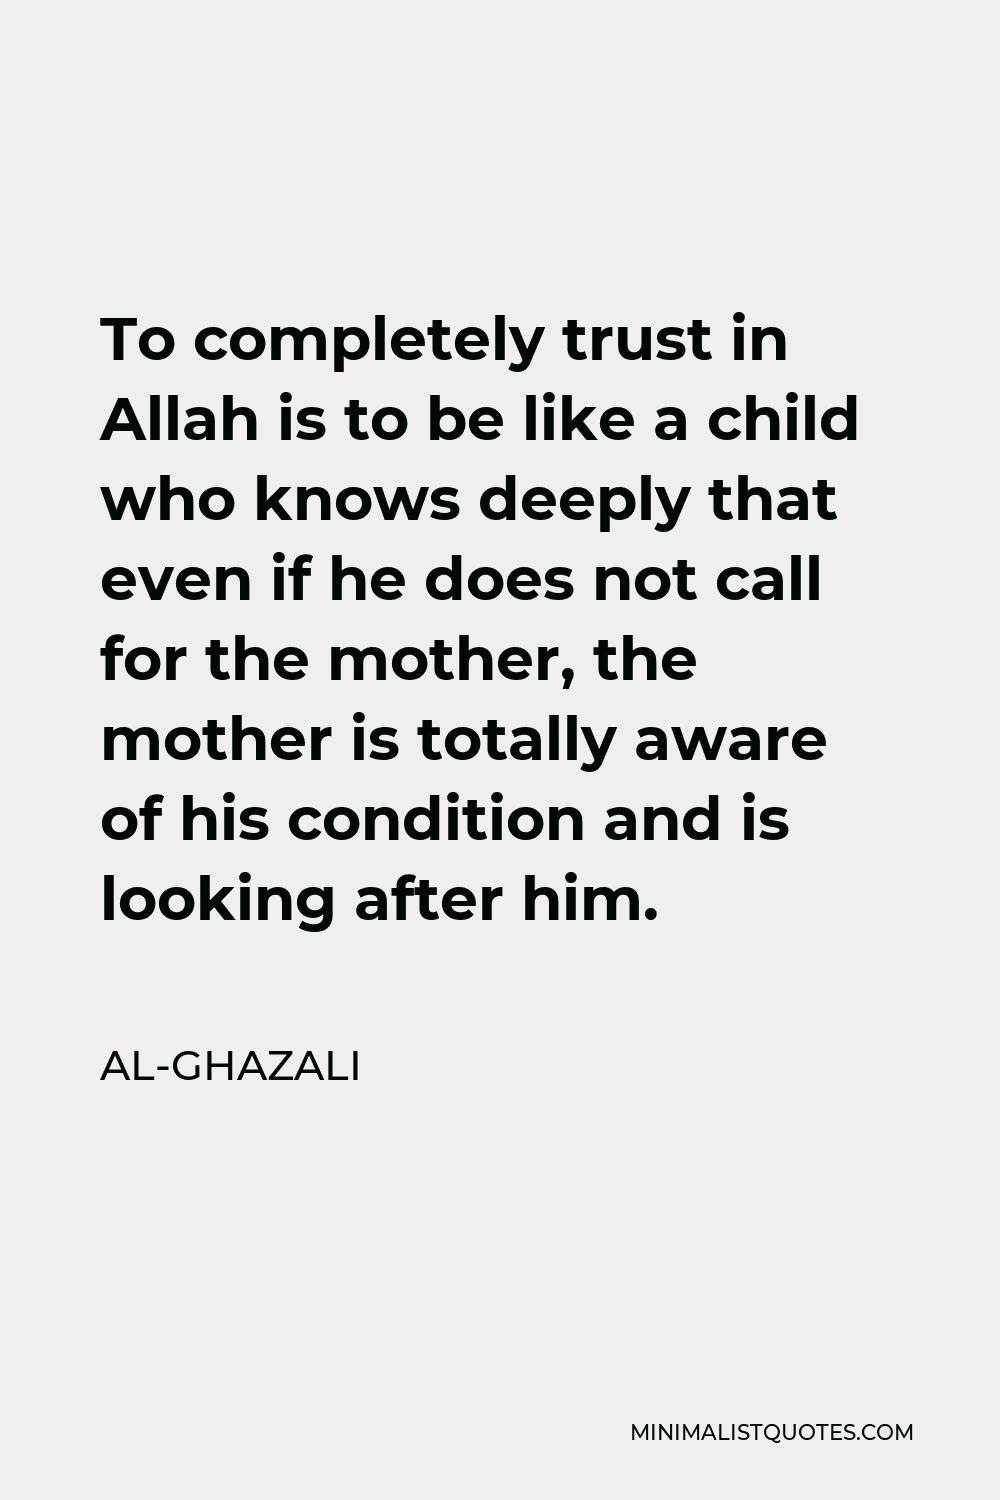 Al-Ghazali Quote - To completely trust in Allah is to be like a child who knows deeply that even if he does not call for the mother, the mother is totally aware of his condition and is looking after him.